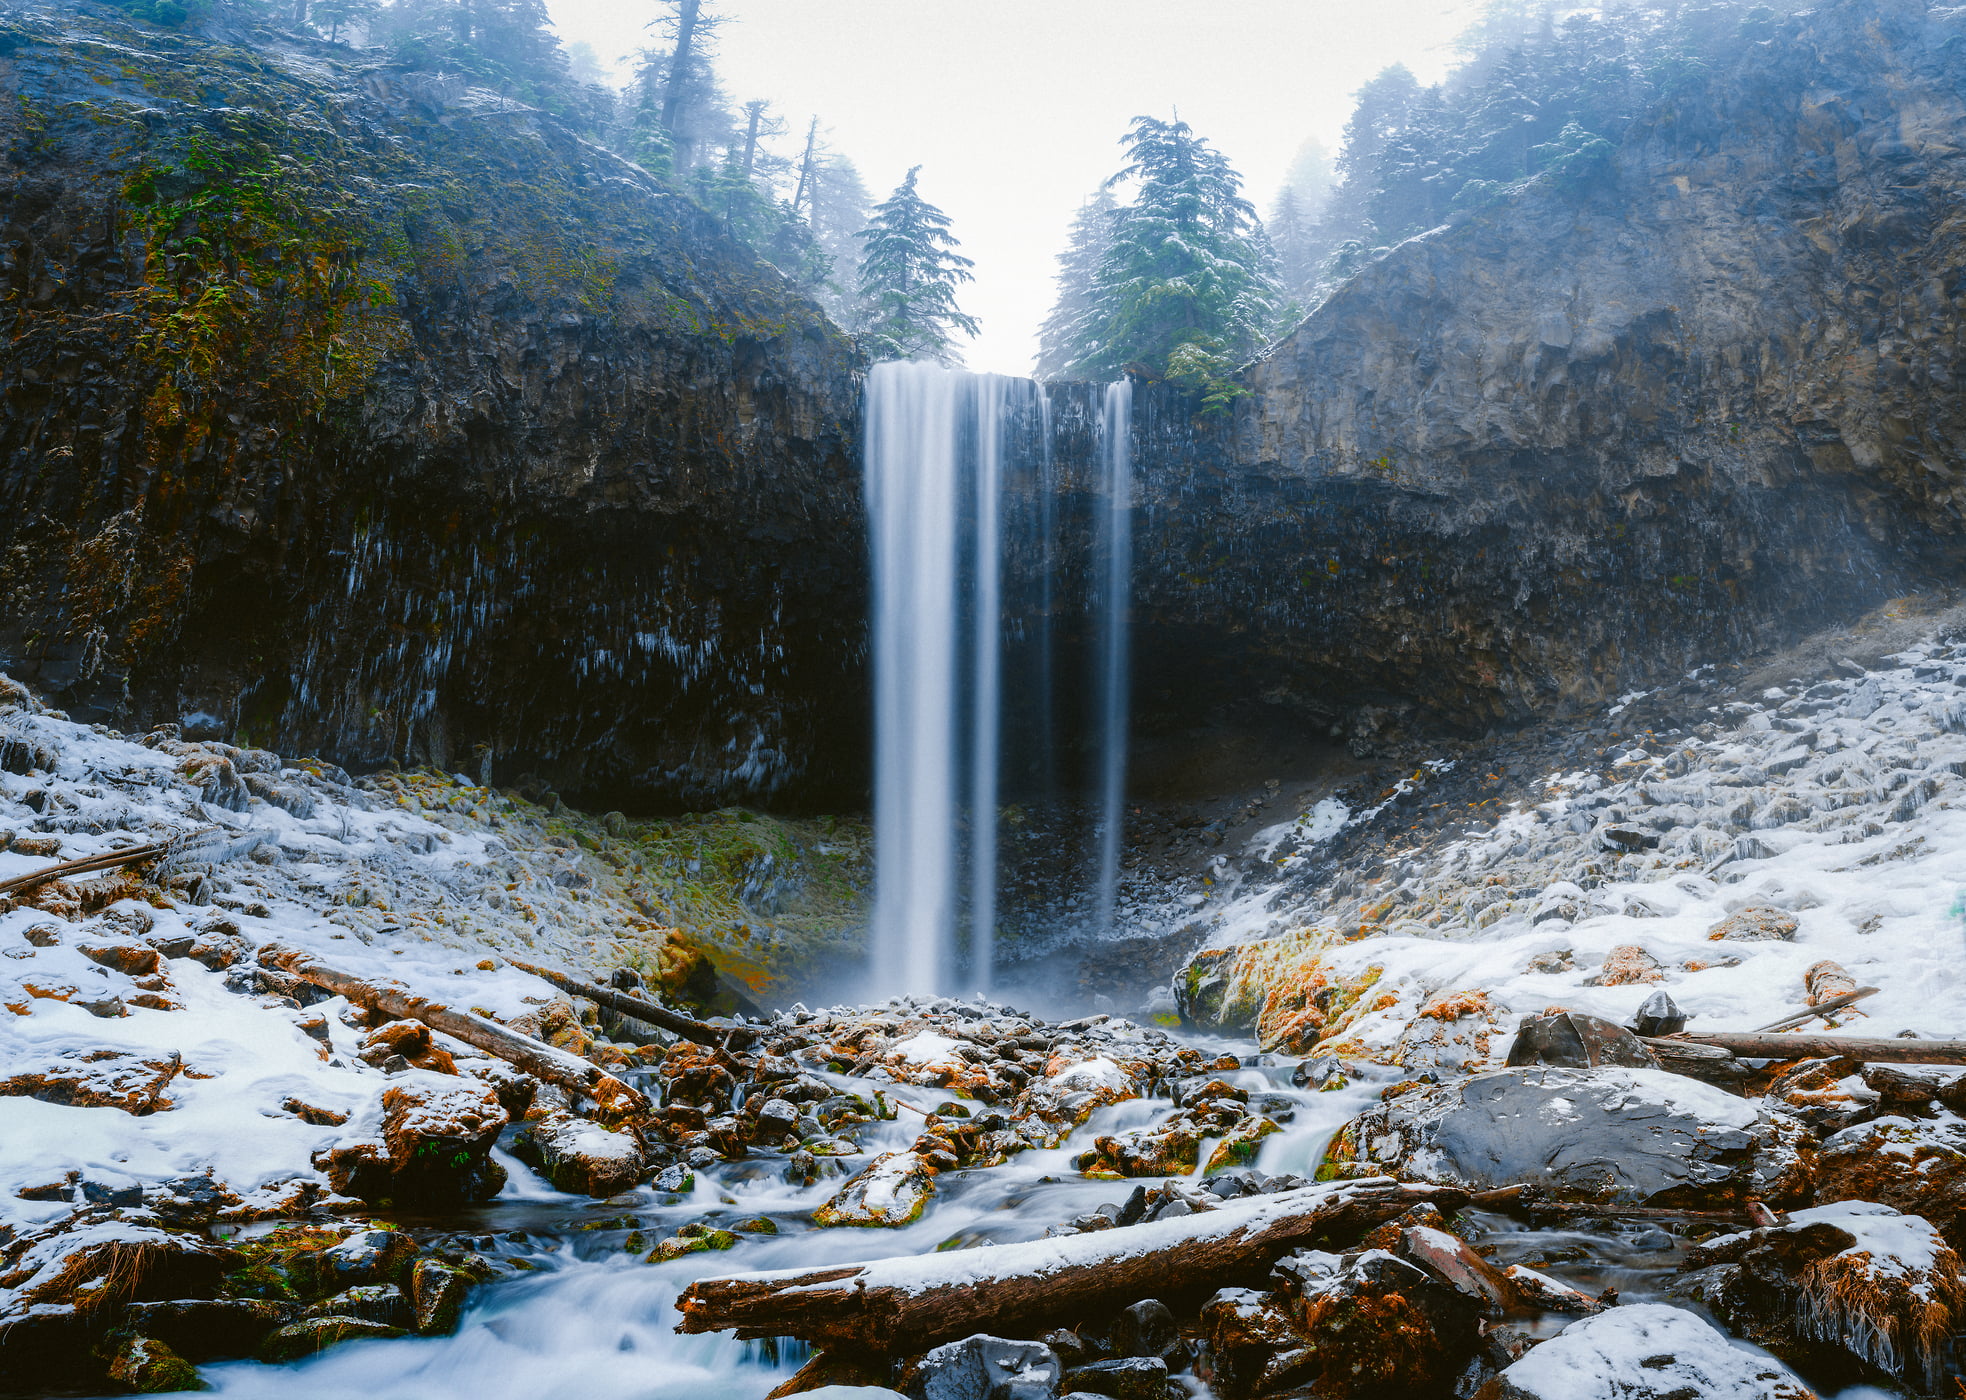 510 megapixels! A very high resolution, large-format VAST photo print of a snowy waterfall; photograph created by Justin Katz at Tamawanas Falls, Mount Hood, Oregon.